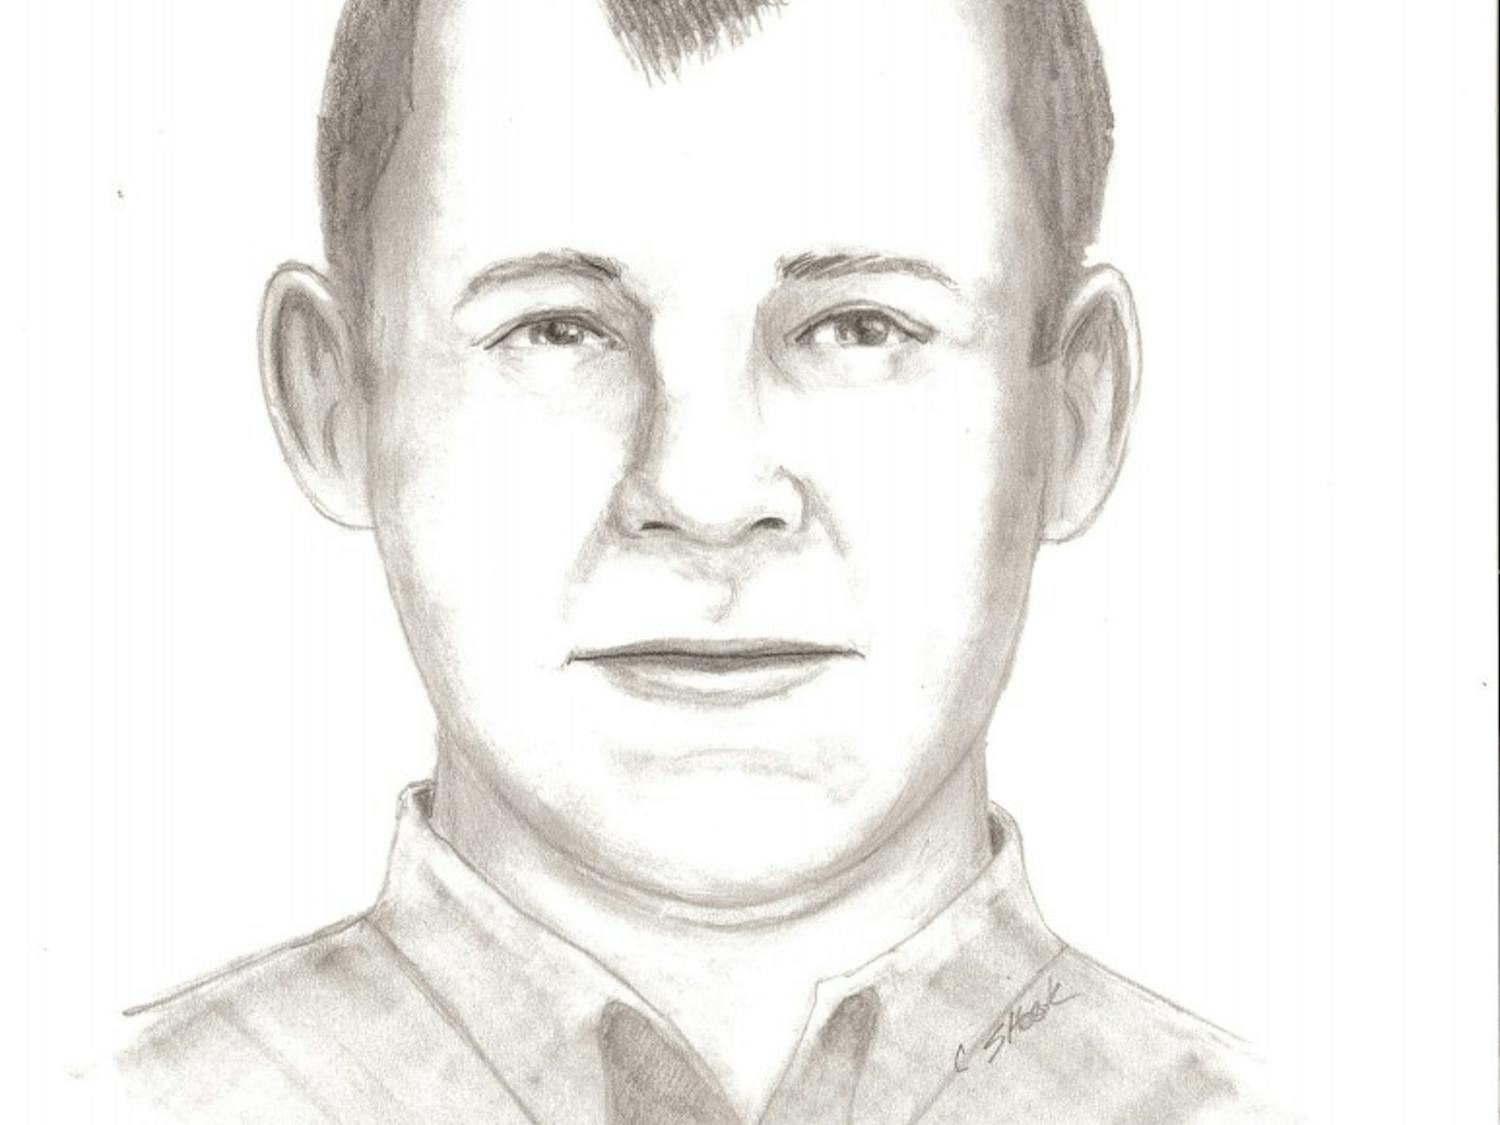 One of two sketches of the March 16, 2018, PNC Bank robbery suspect the Auburn Police Department released on March 26, 2018. This sketch is rendered with thinner lips.